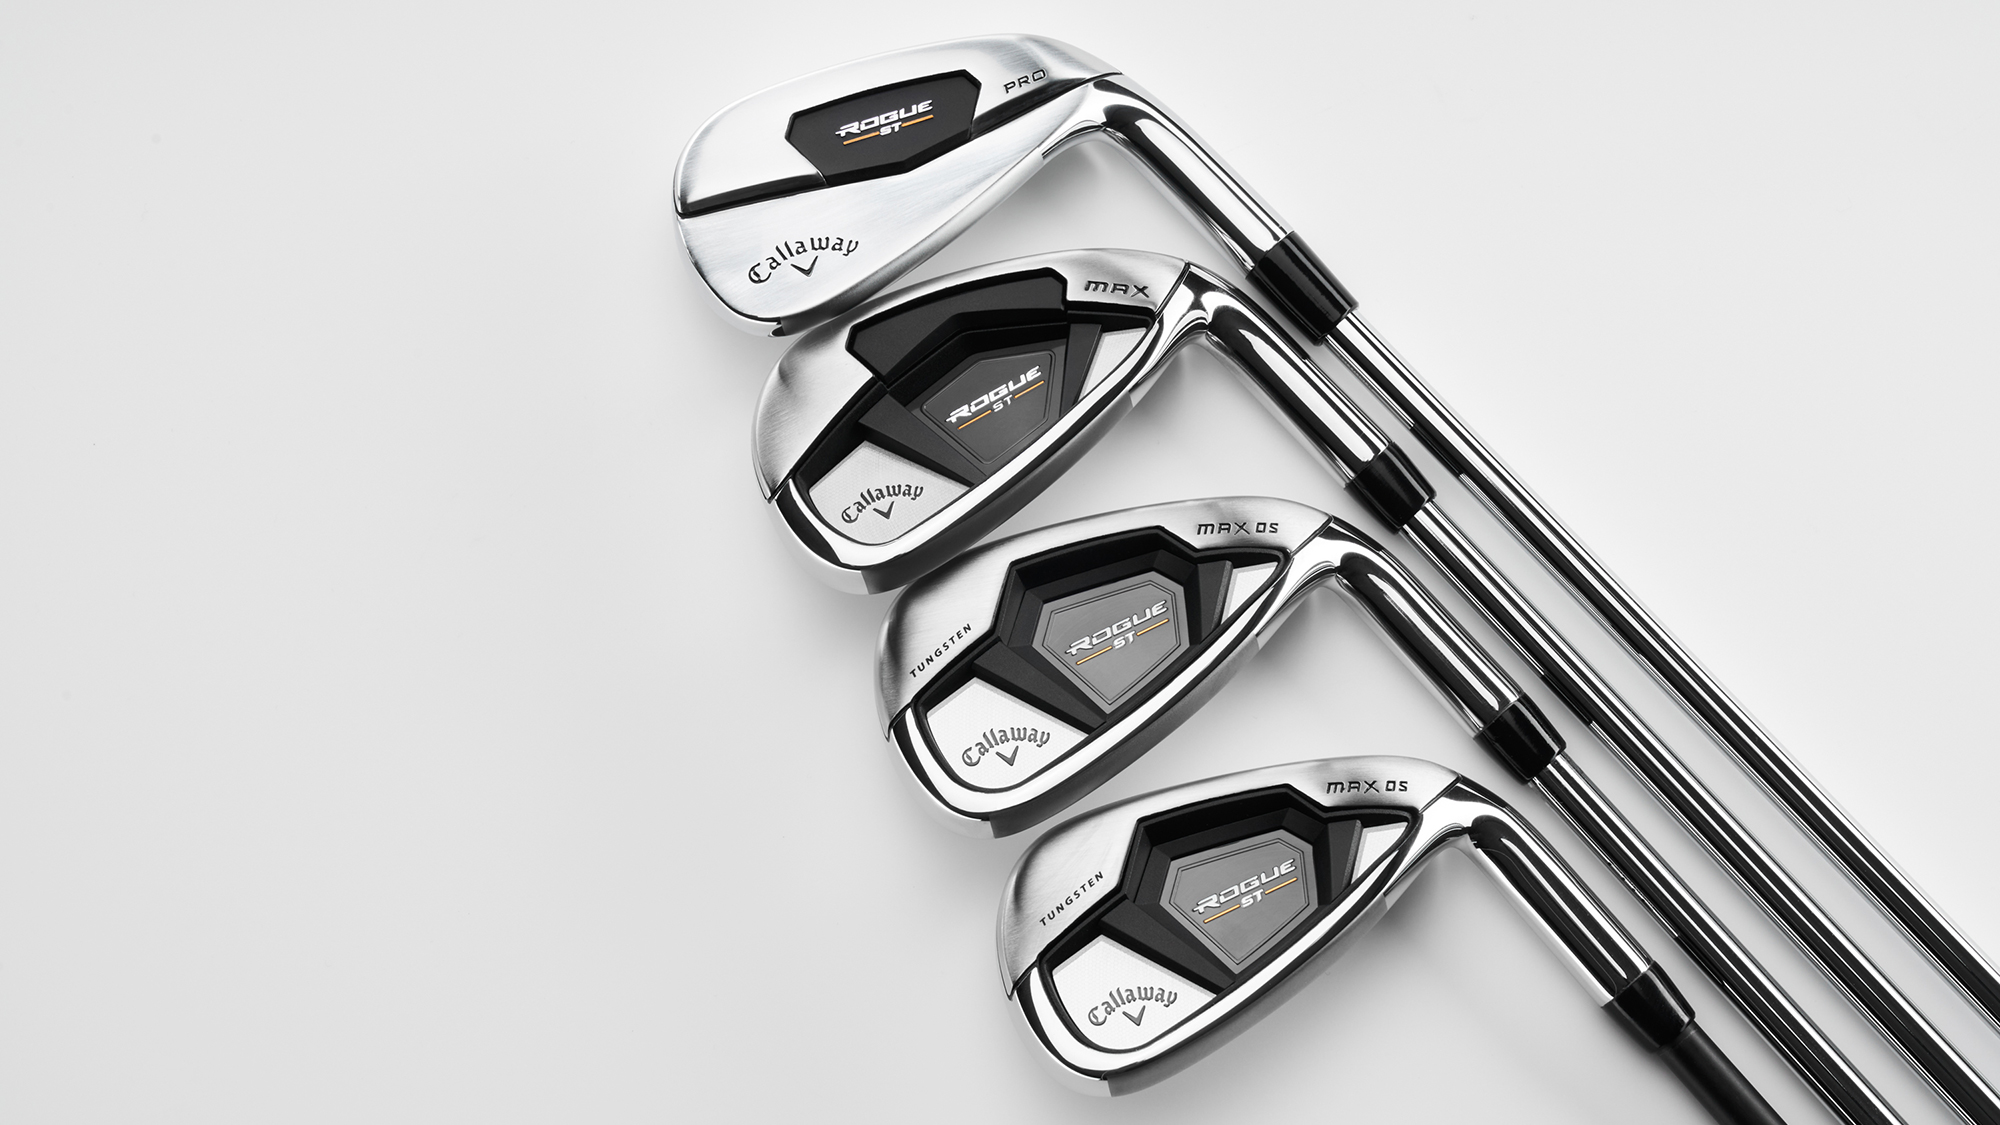 Weight watchers: The latest drivers and irons - Australian Golf Digest